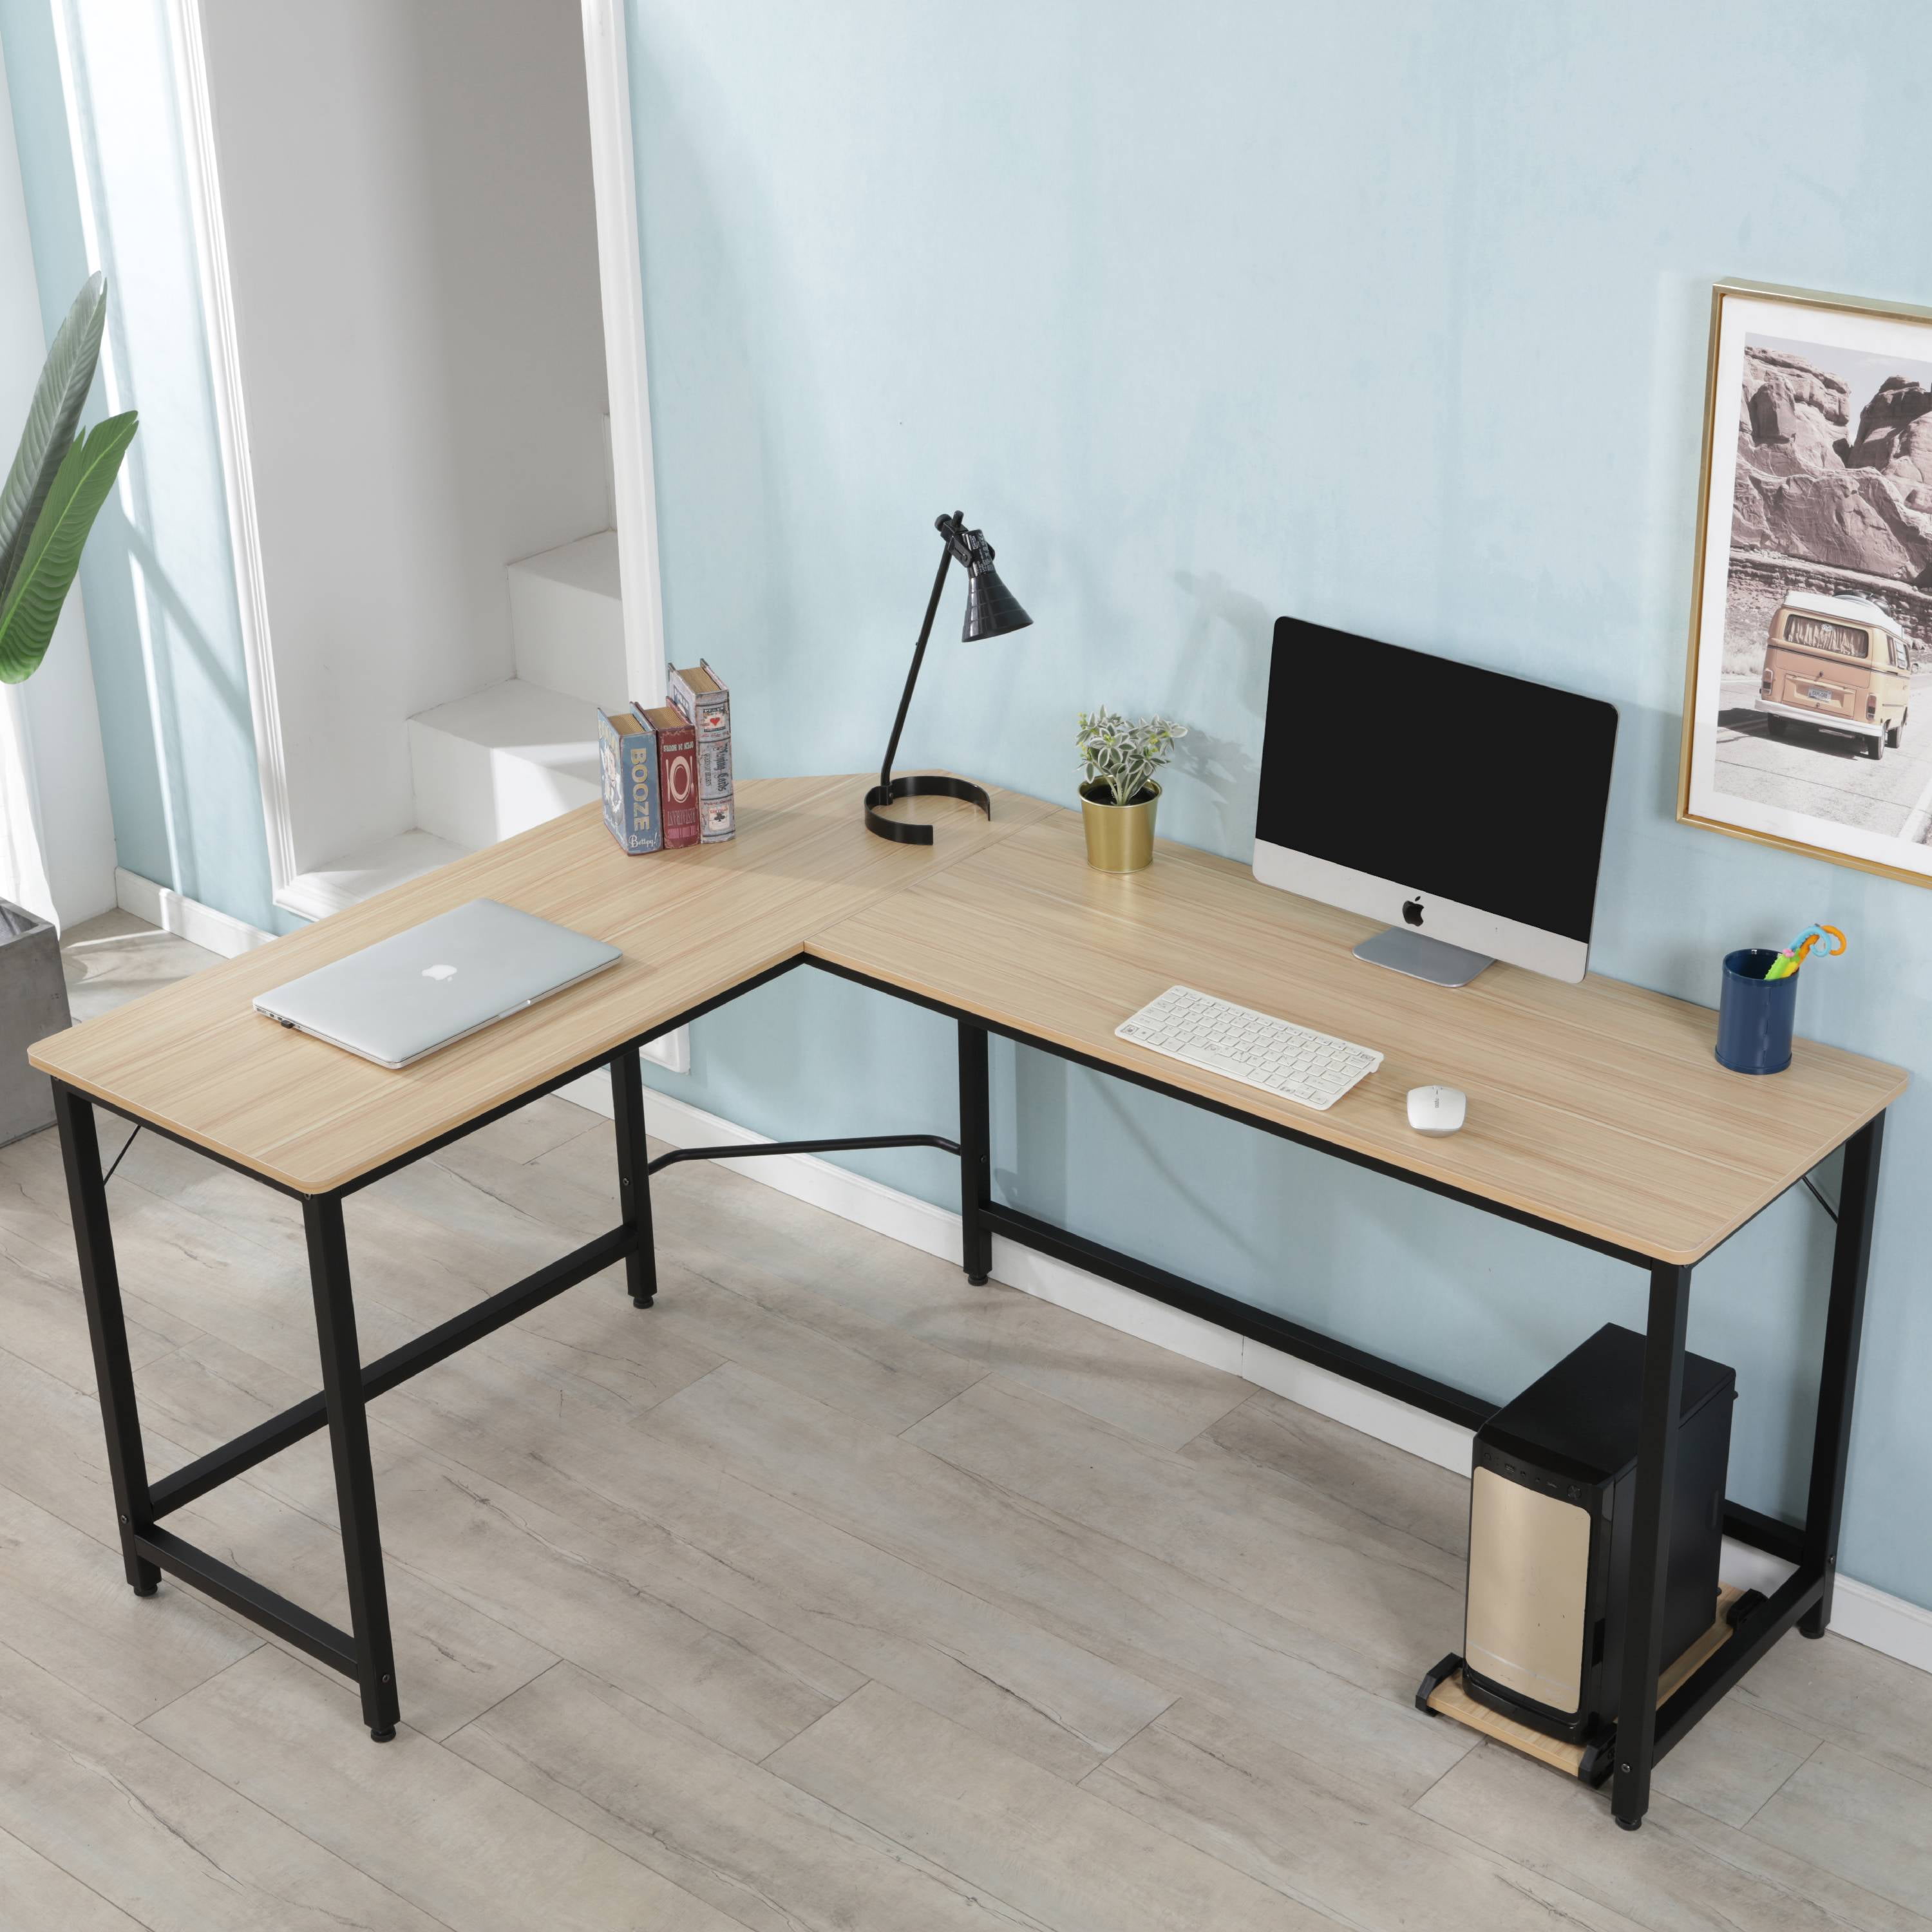 L-Shaped Computer Desk for Office, 66'' x 49'' x 30'' Writing Computer